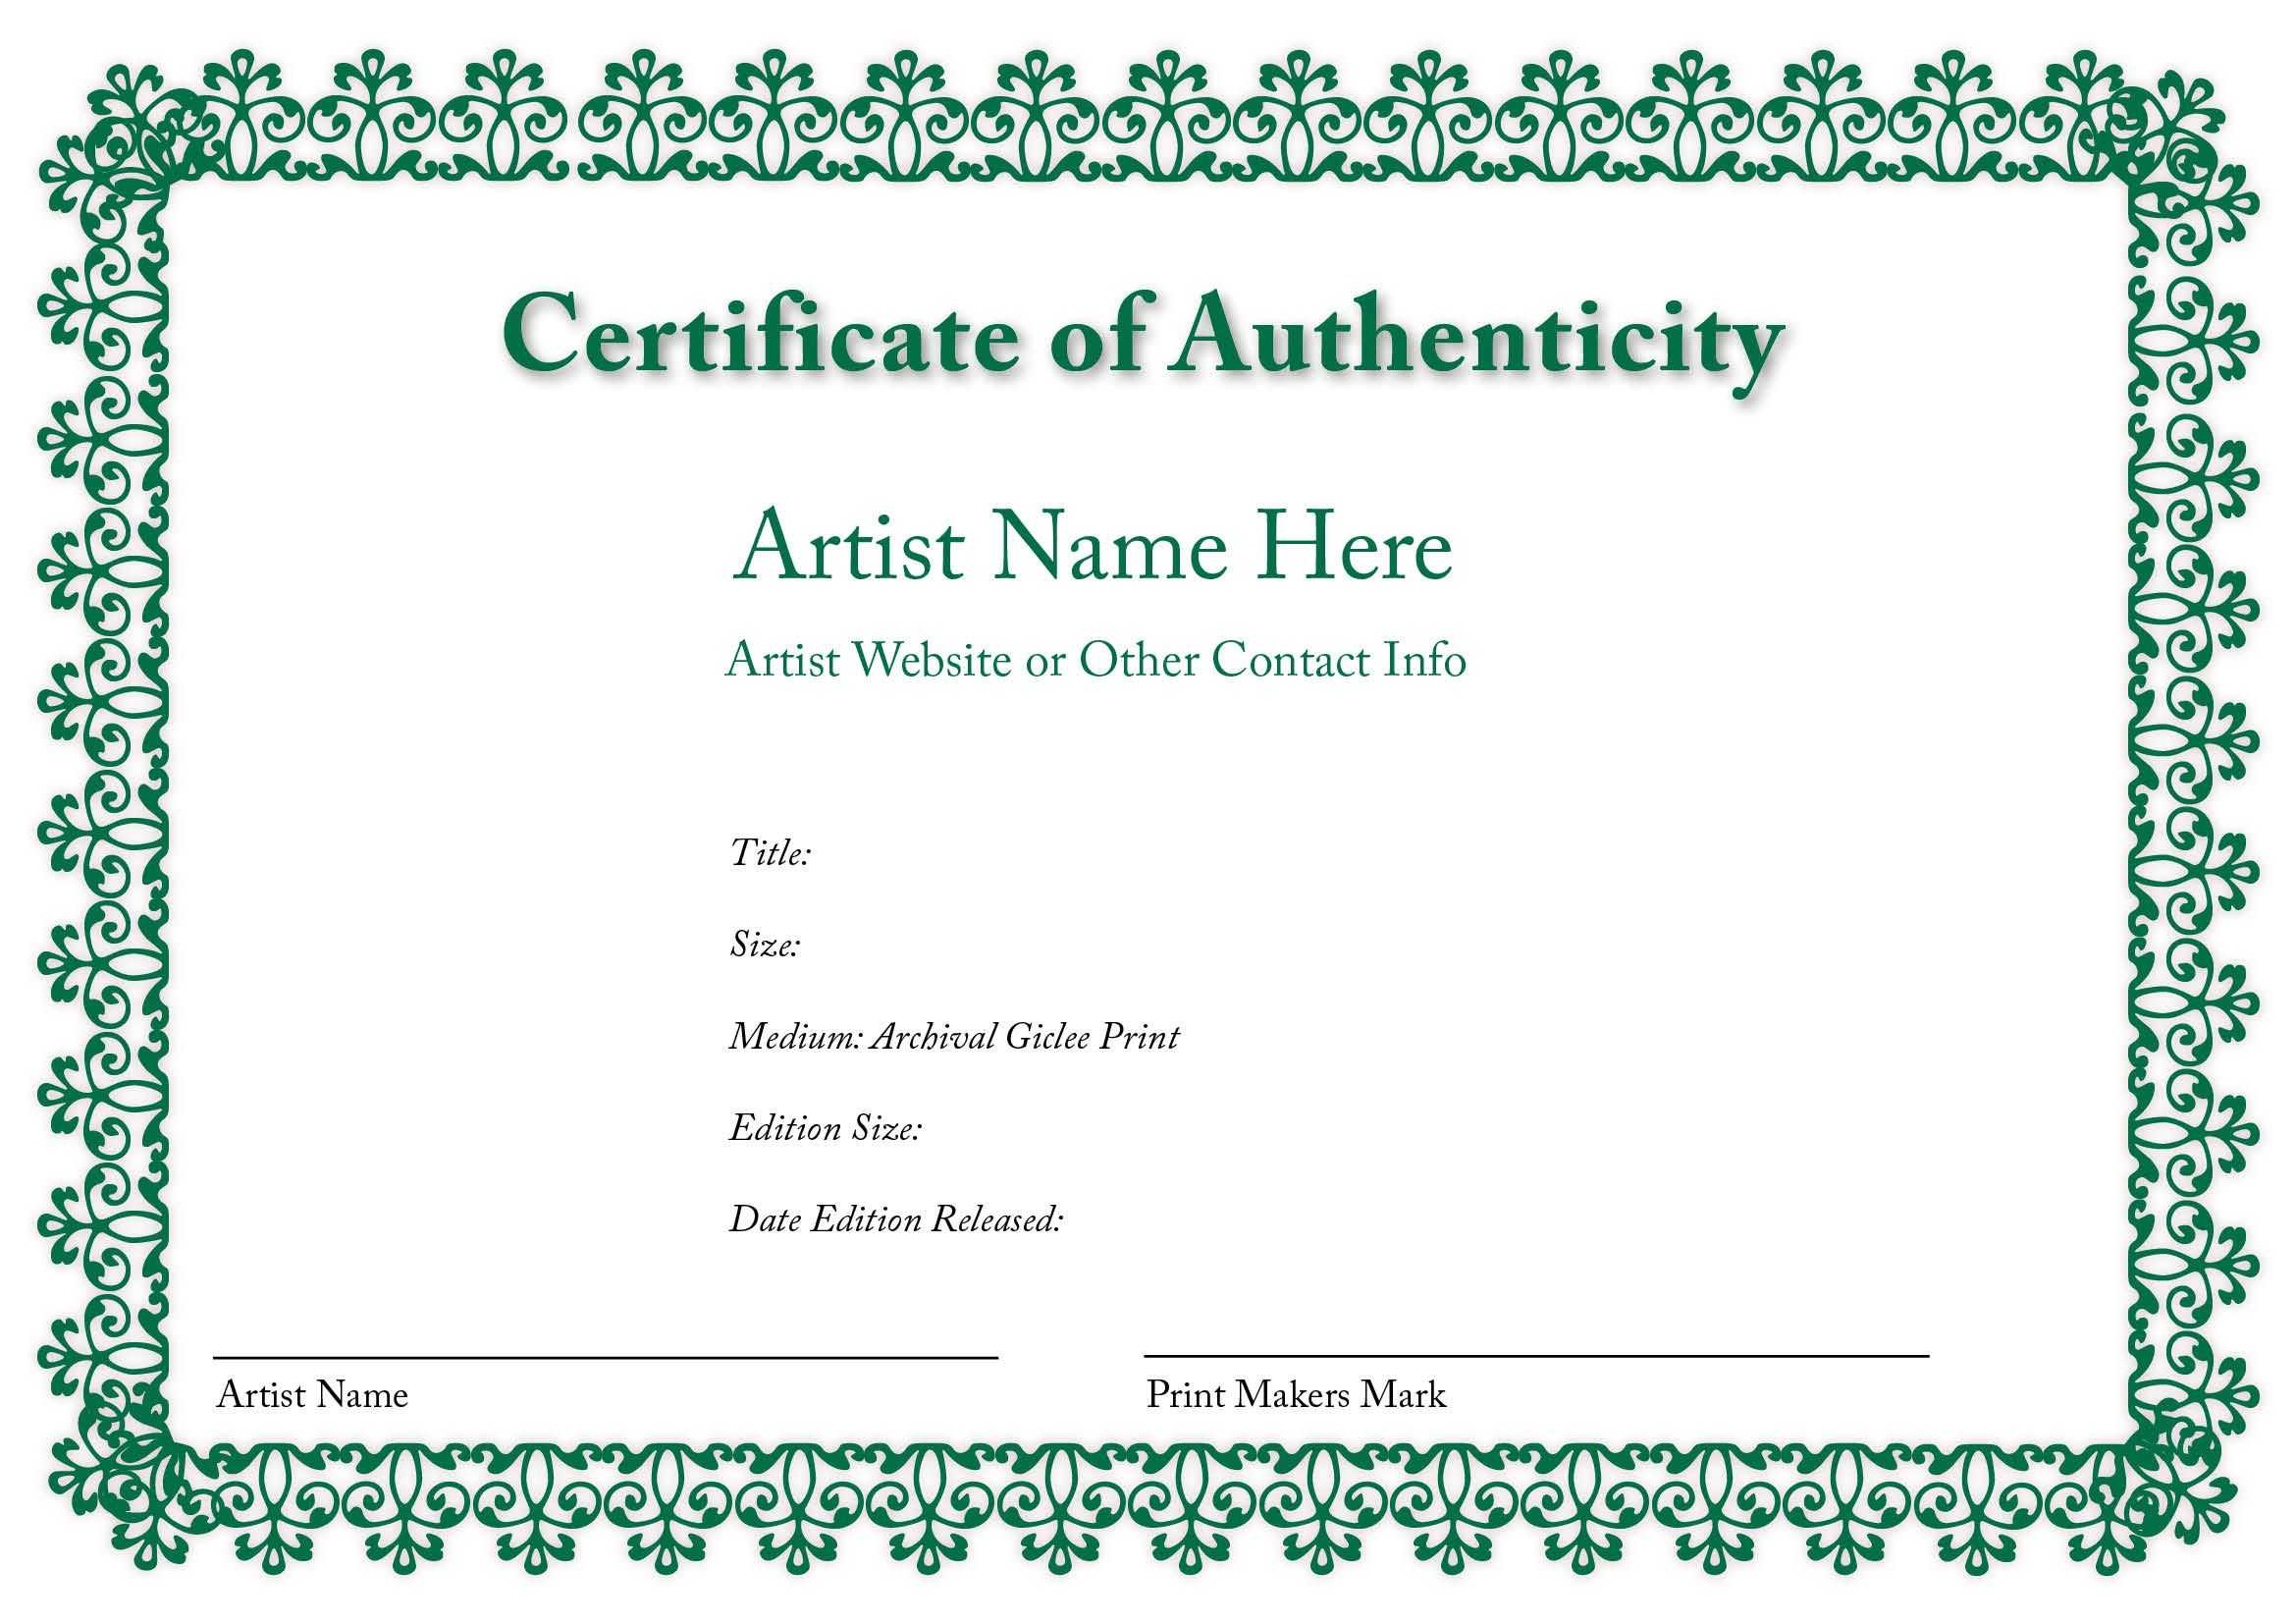 Certificate Of Authenticity Of An Art Print In 2019 Inside Certificate Of Authenticity Template